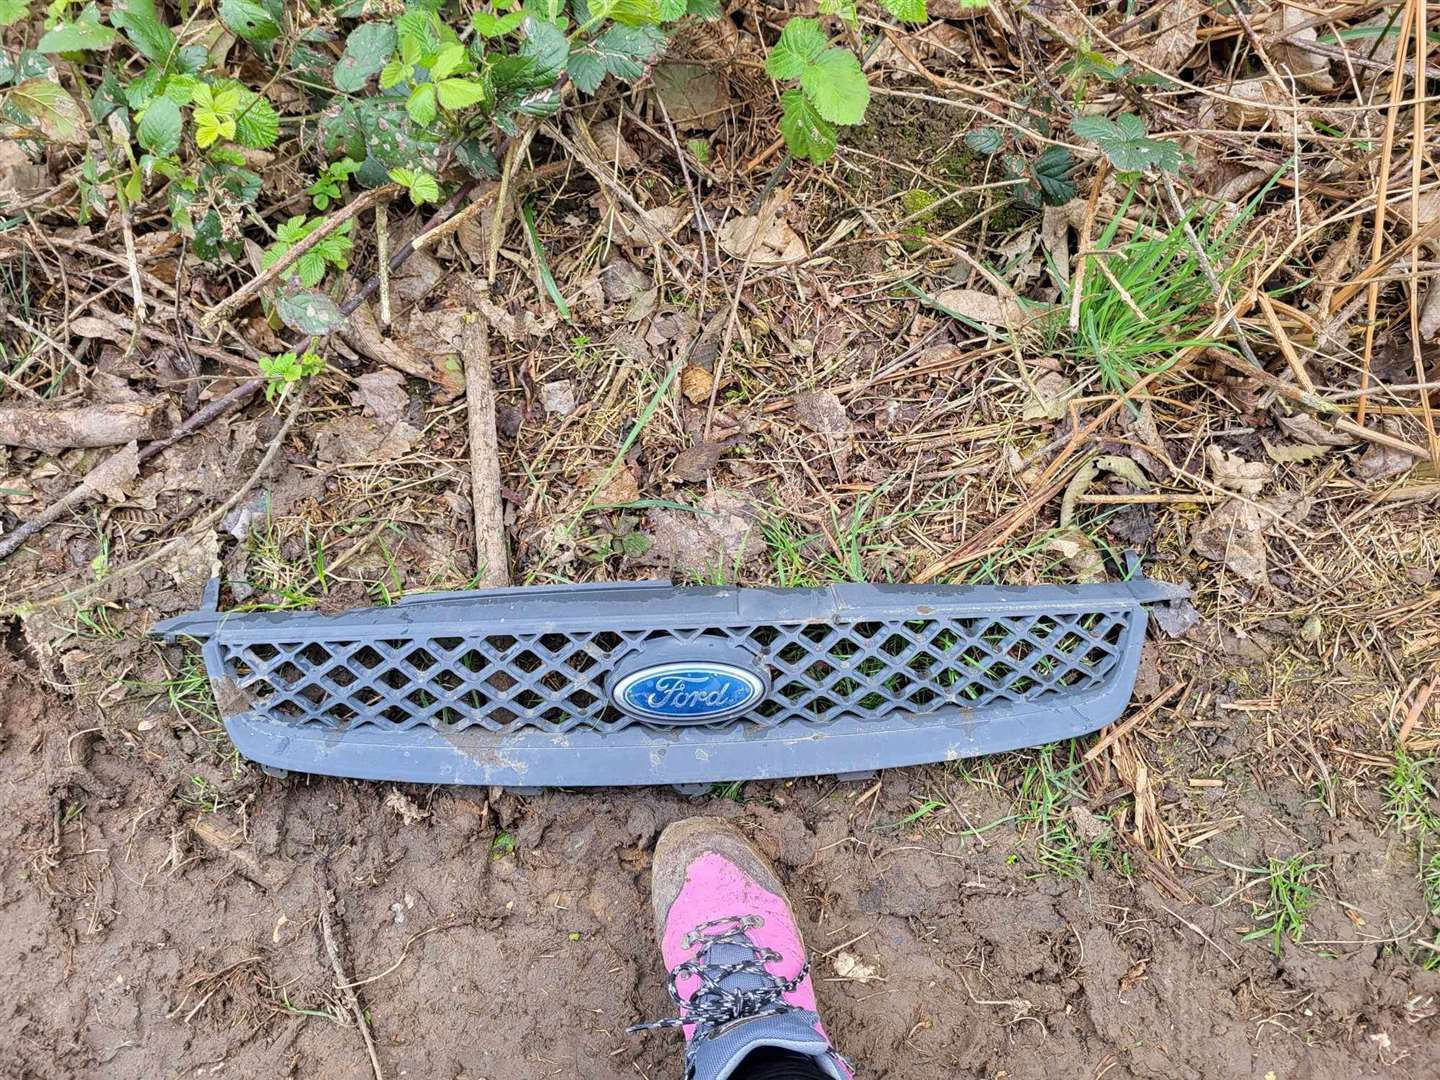 The front of a Ford grille was found in the woodland. Picture: Gill Prince